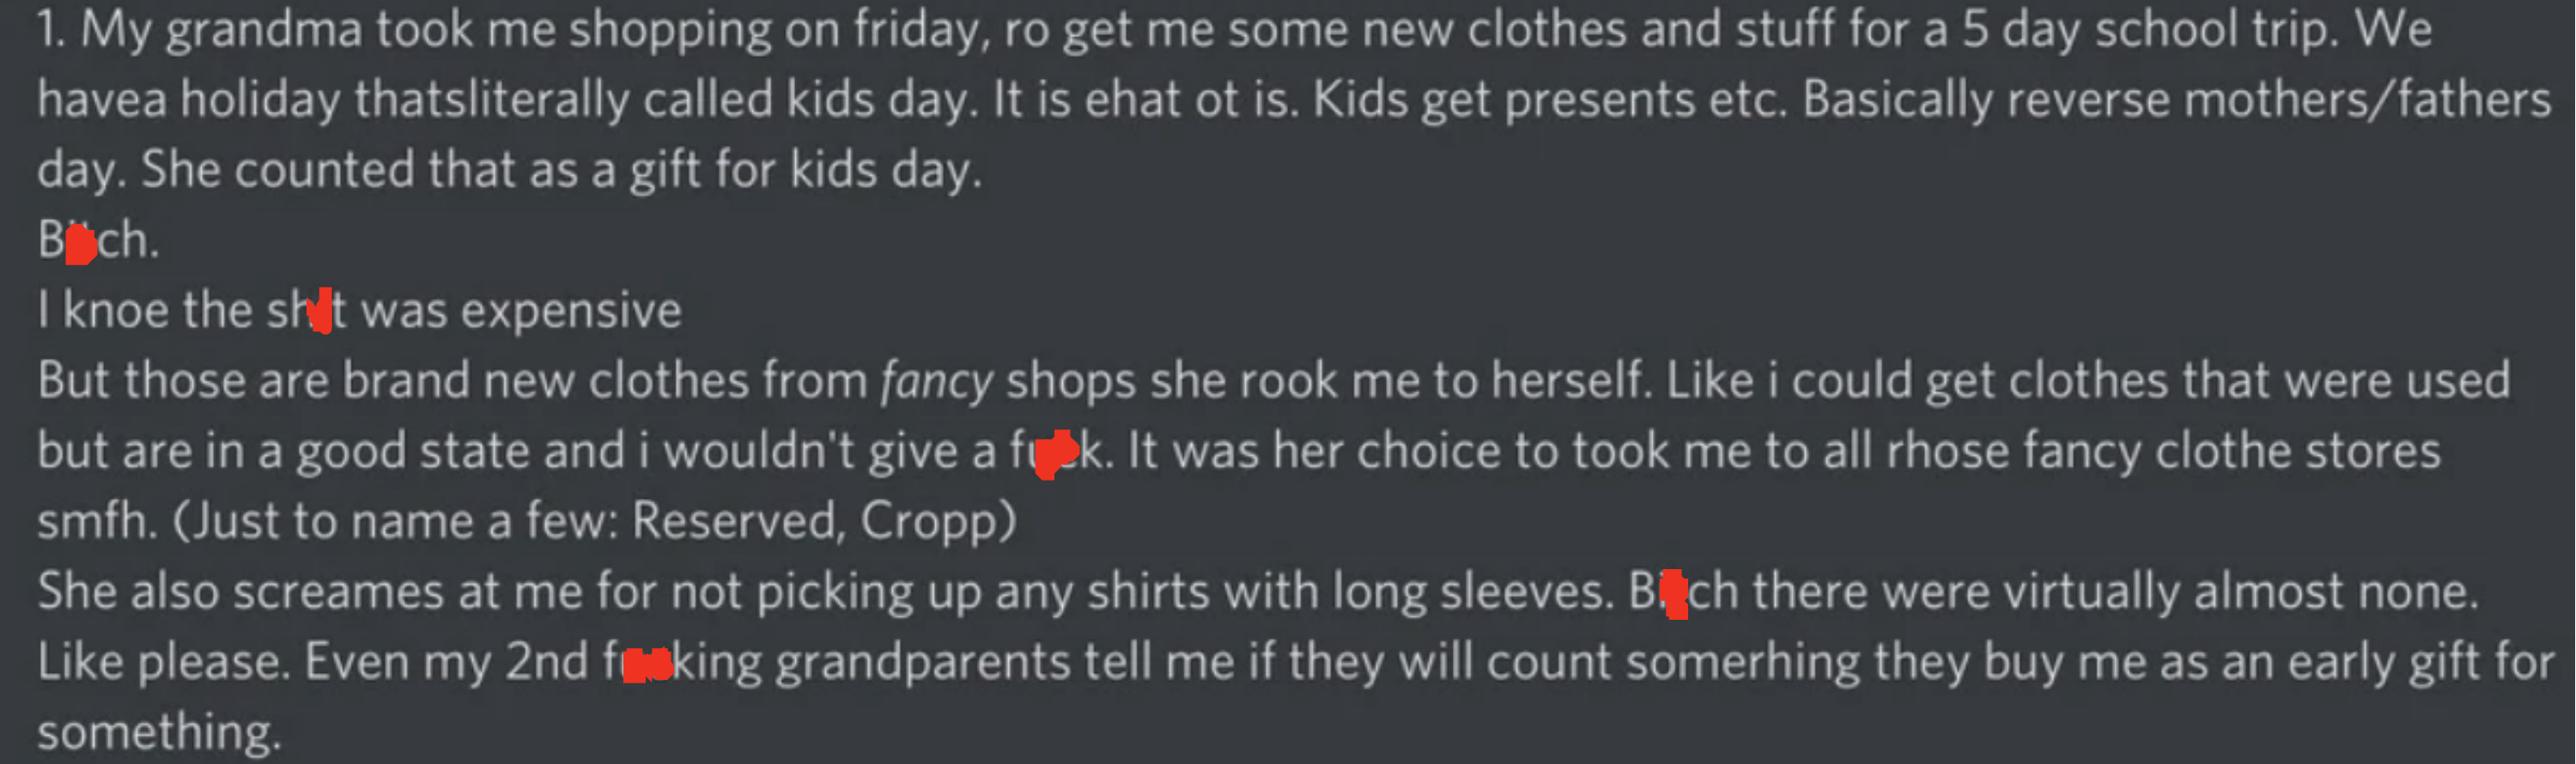 A kid saying his grandma took him shopping for clothes and then counted those as gifts for the holidays, then calling her a bitch and saying it was her choice to get those nice clothes for him so she should get him another gift